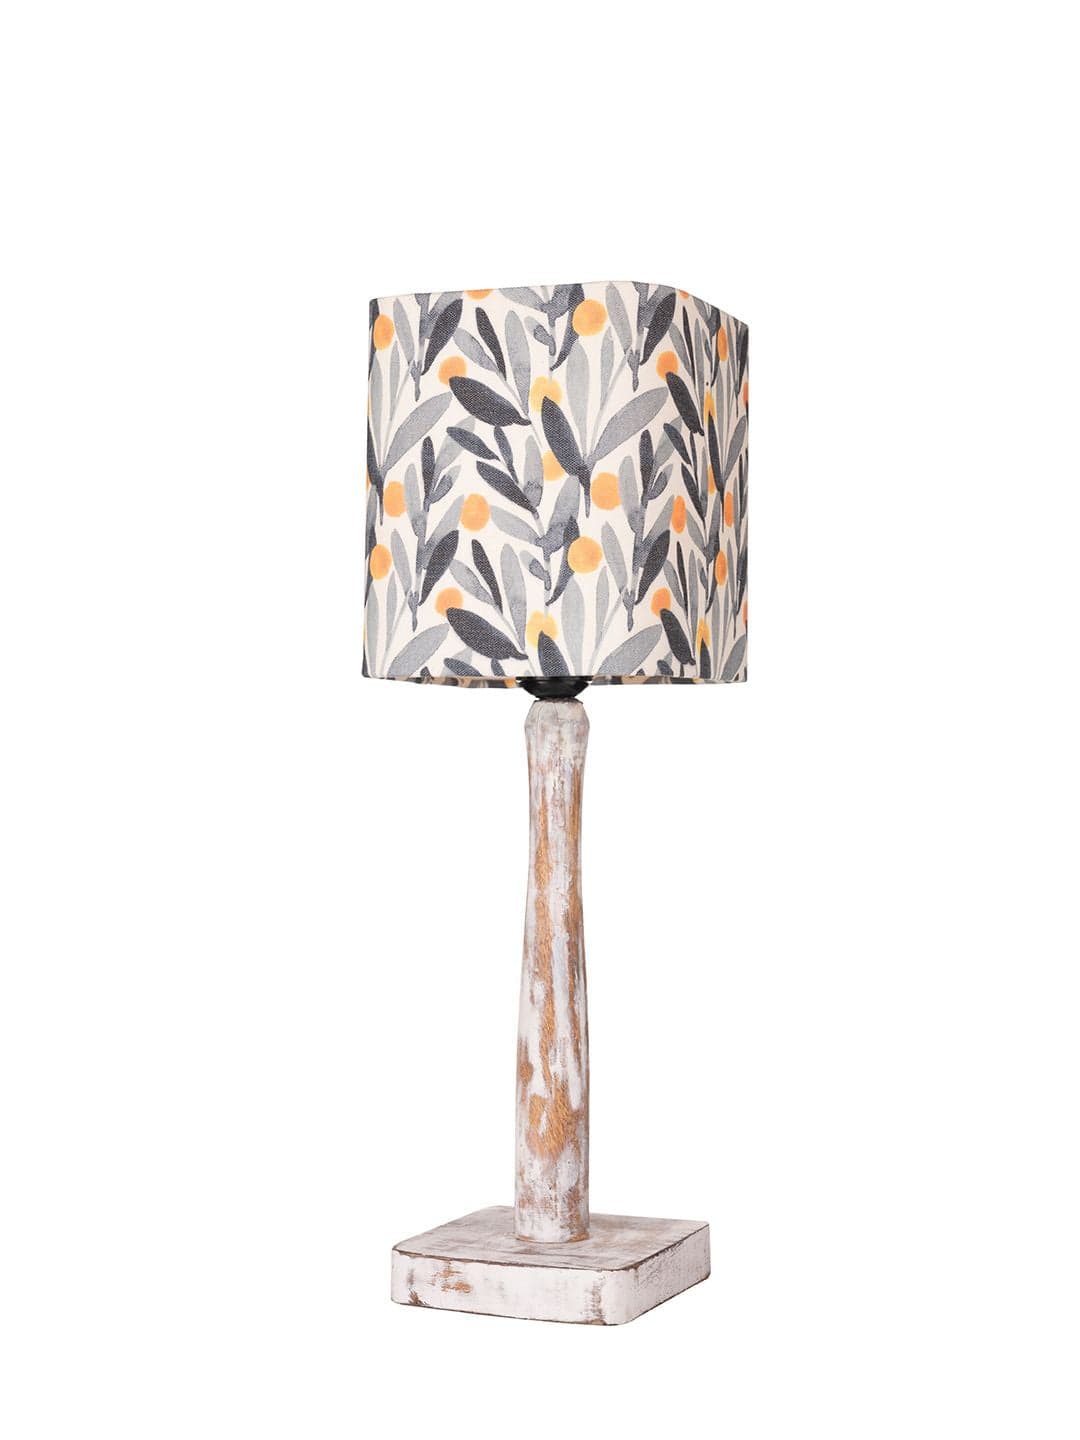 Curve Distress white Lamp with Yellow Leaves shade